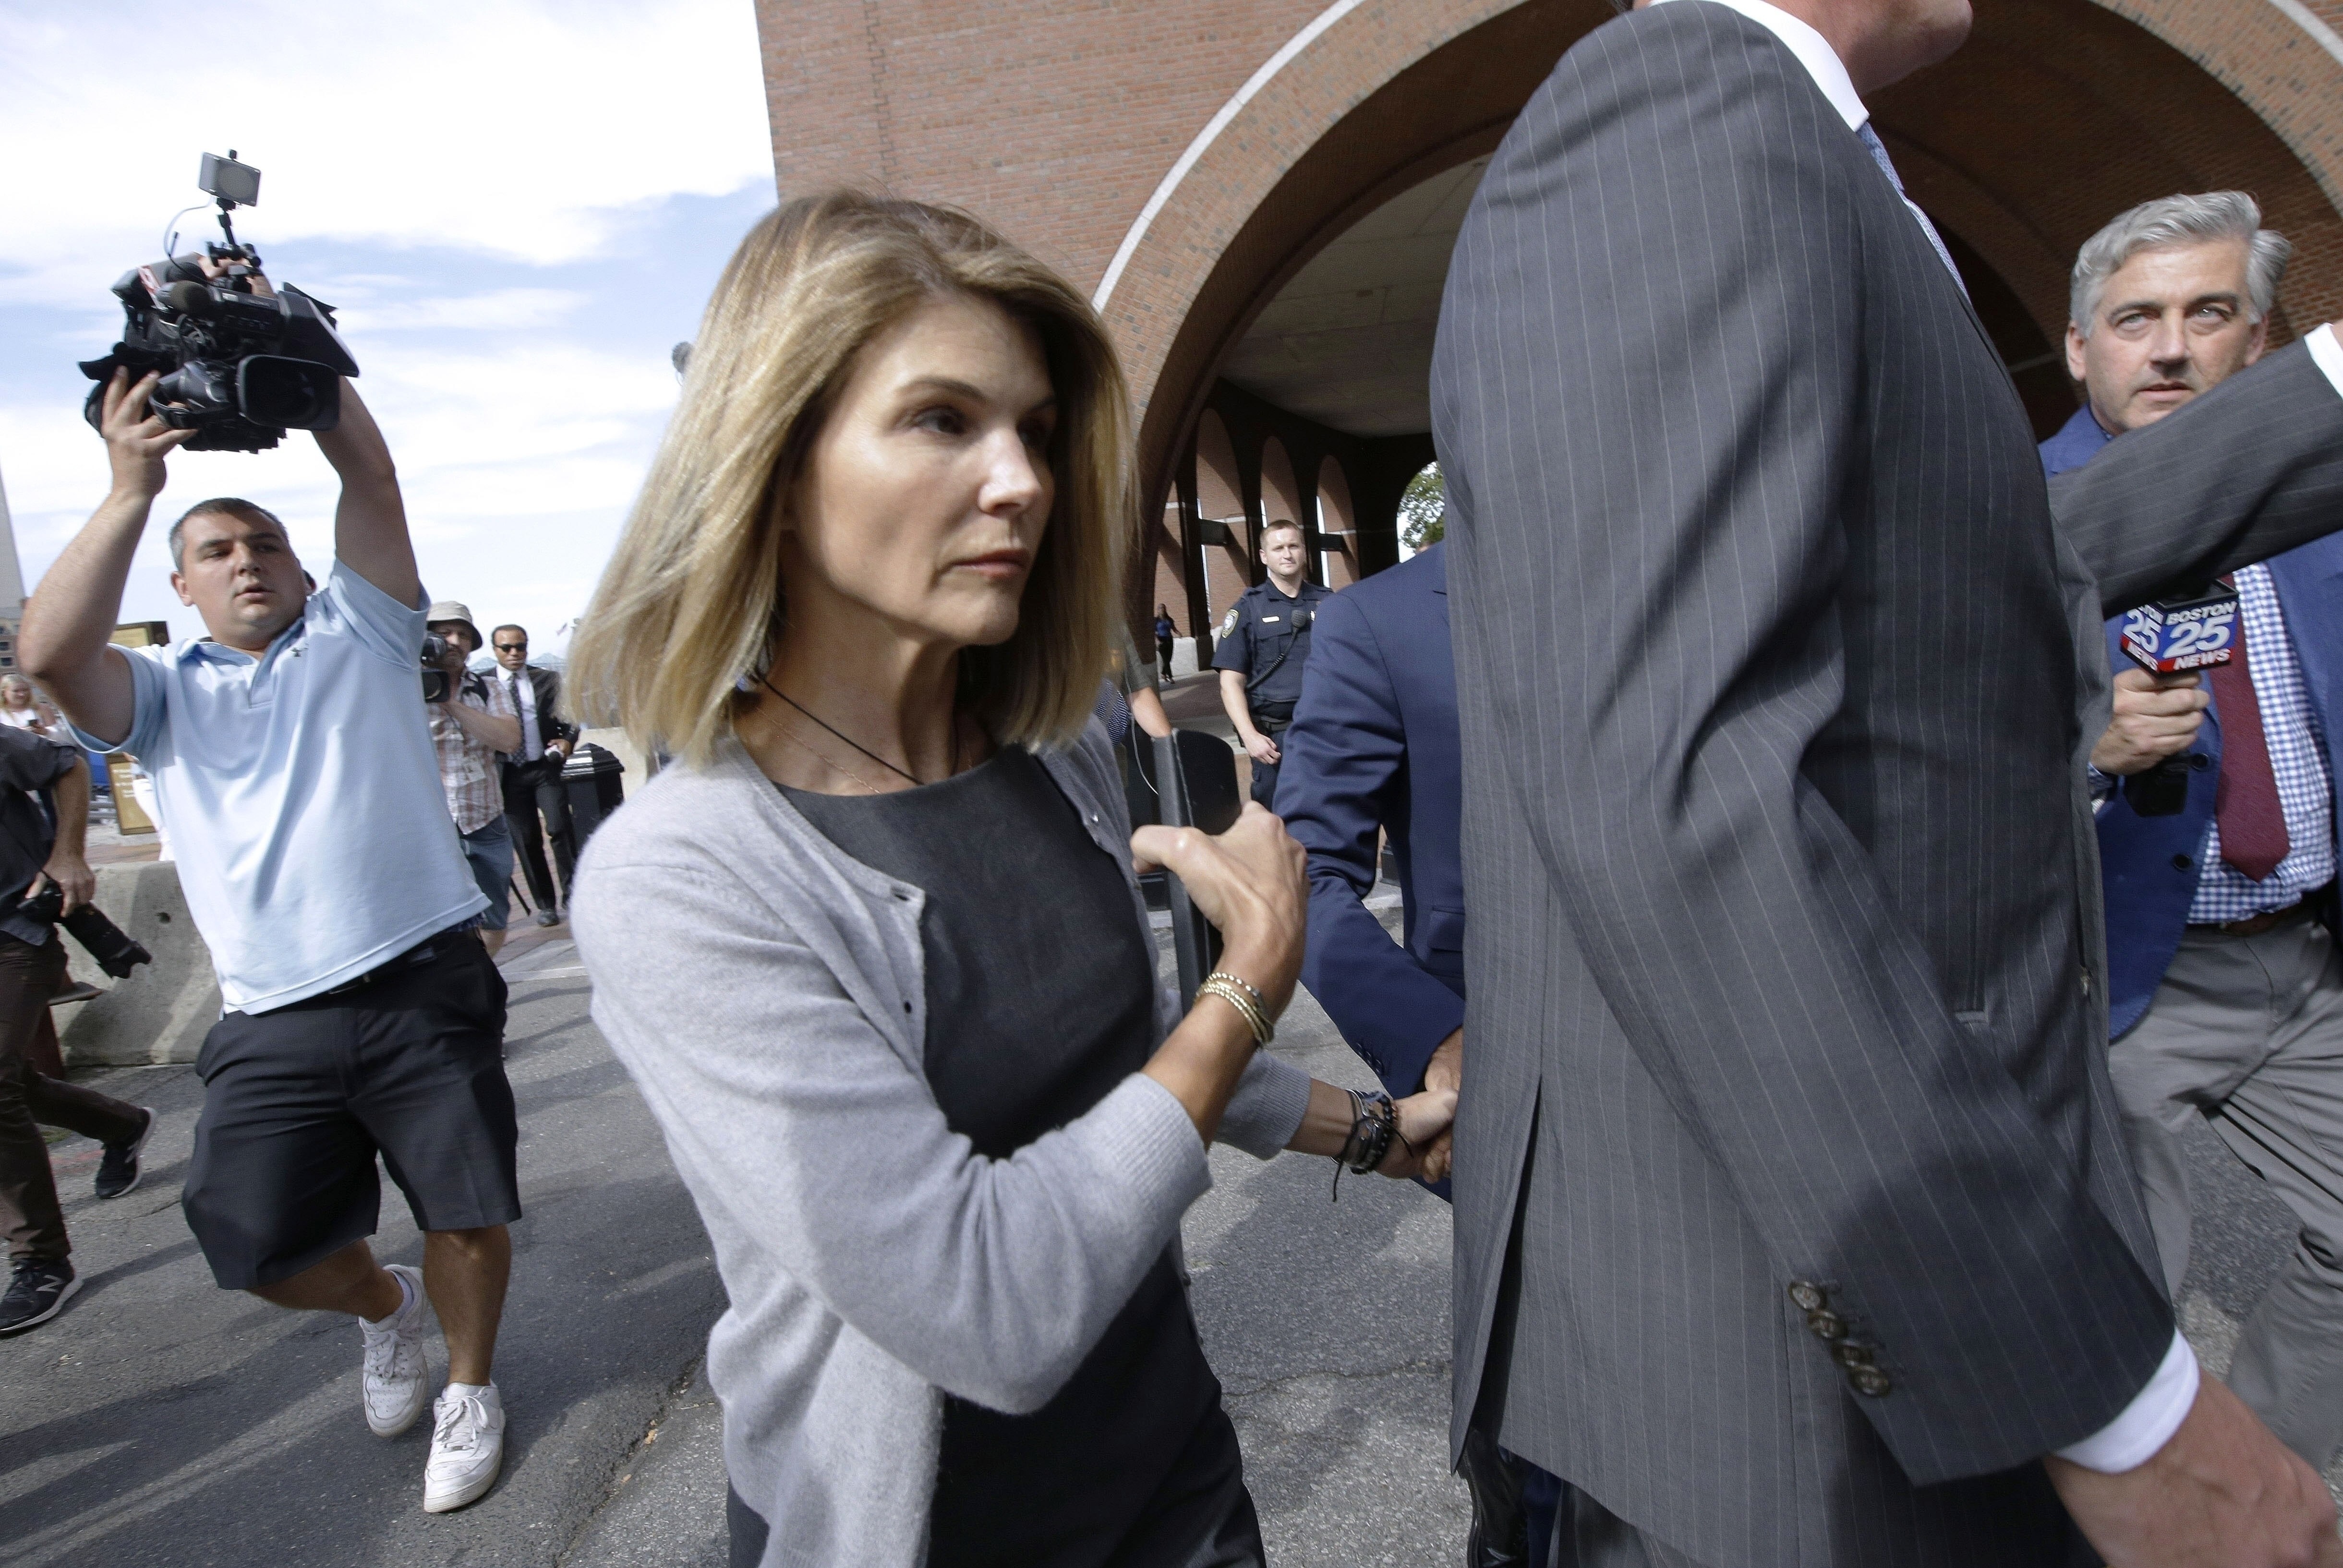 Actress Lori Loughlin has reported to a federal prison in California to begin serving her two-month sentence for her role in the college admissions bribery scandal. Photo: AP Photo